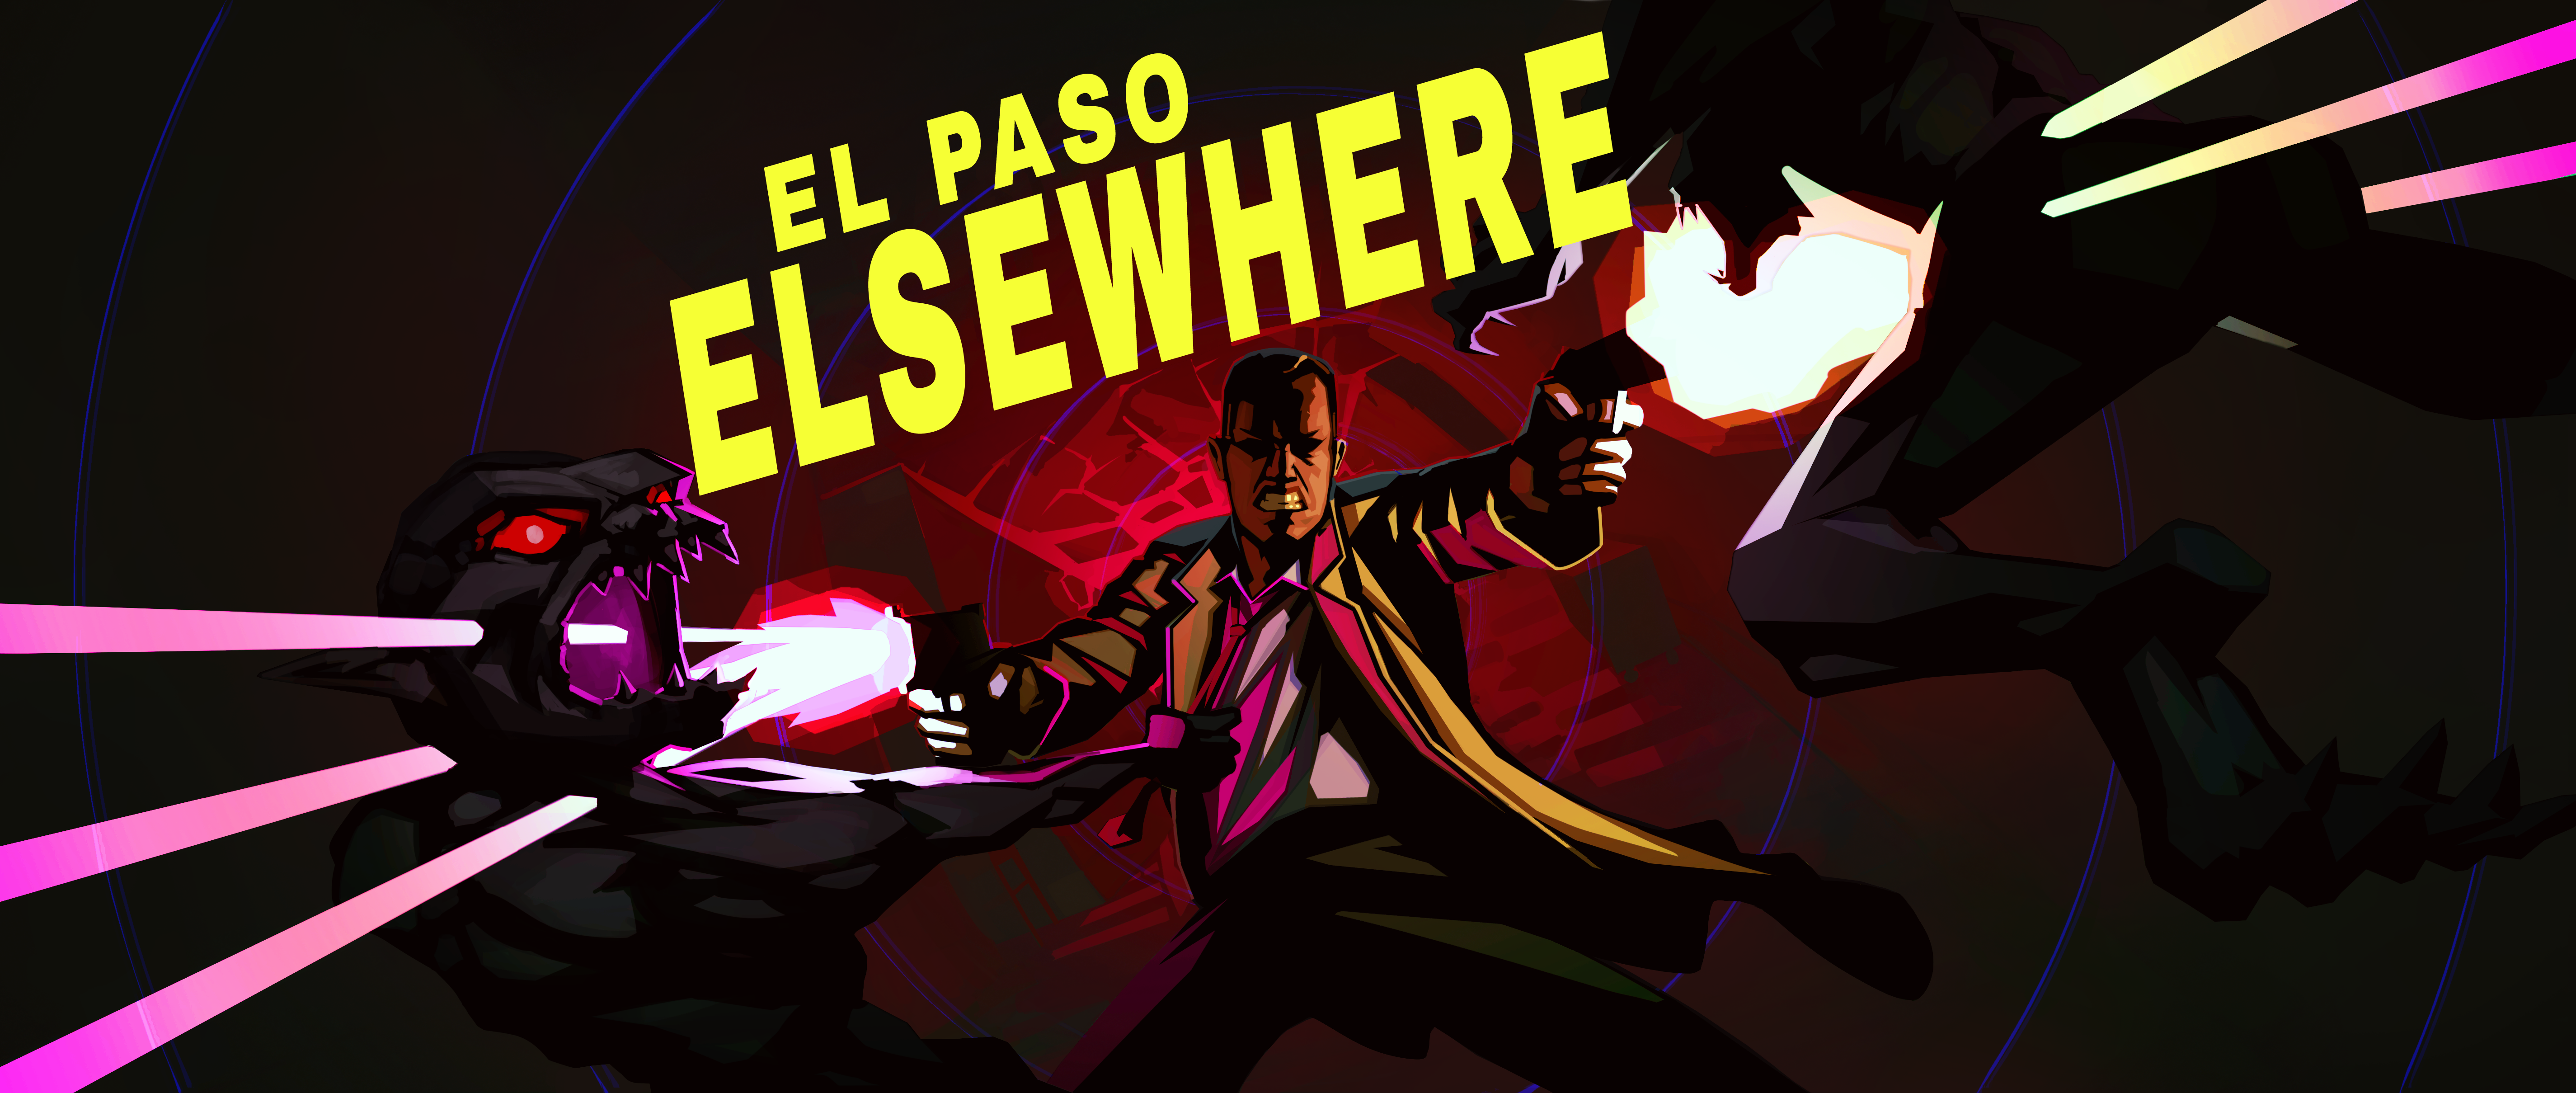 LaKeith Stanfield To Star In Film Adaptaton of Hit Indie Video Game ‘El Paso, Elsewhere,’ X Salutes Game Developer Xalavier Nelson